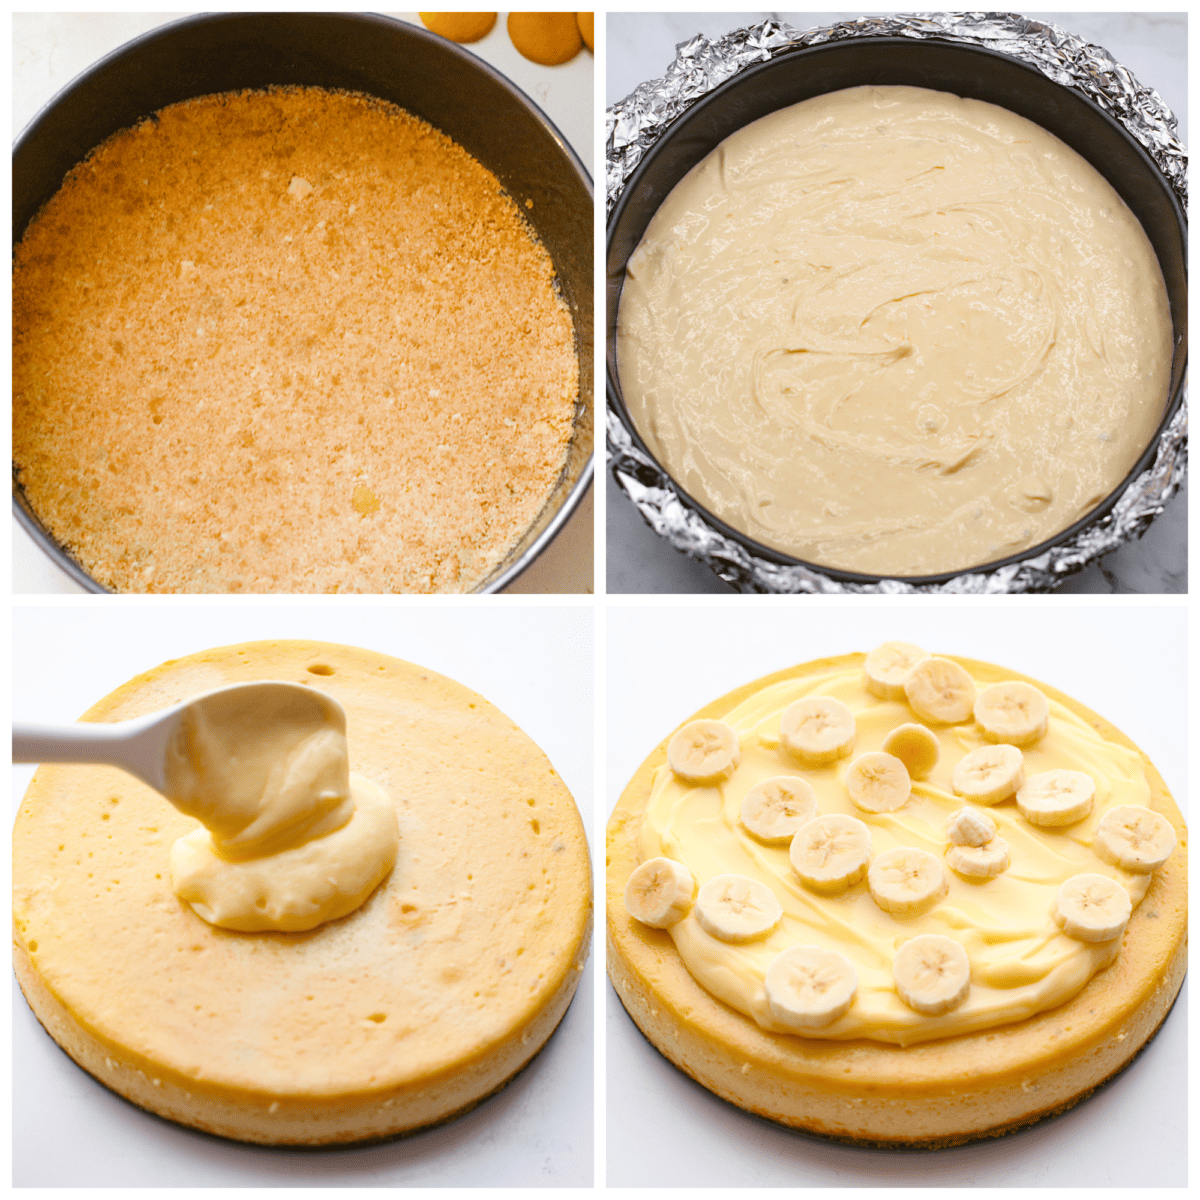 4 pictures showing the process steps to make banana pudding cheesecake. 